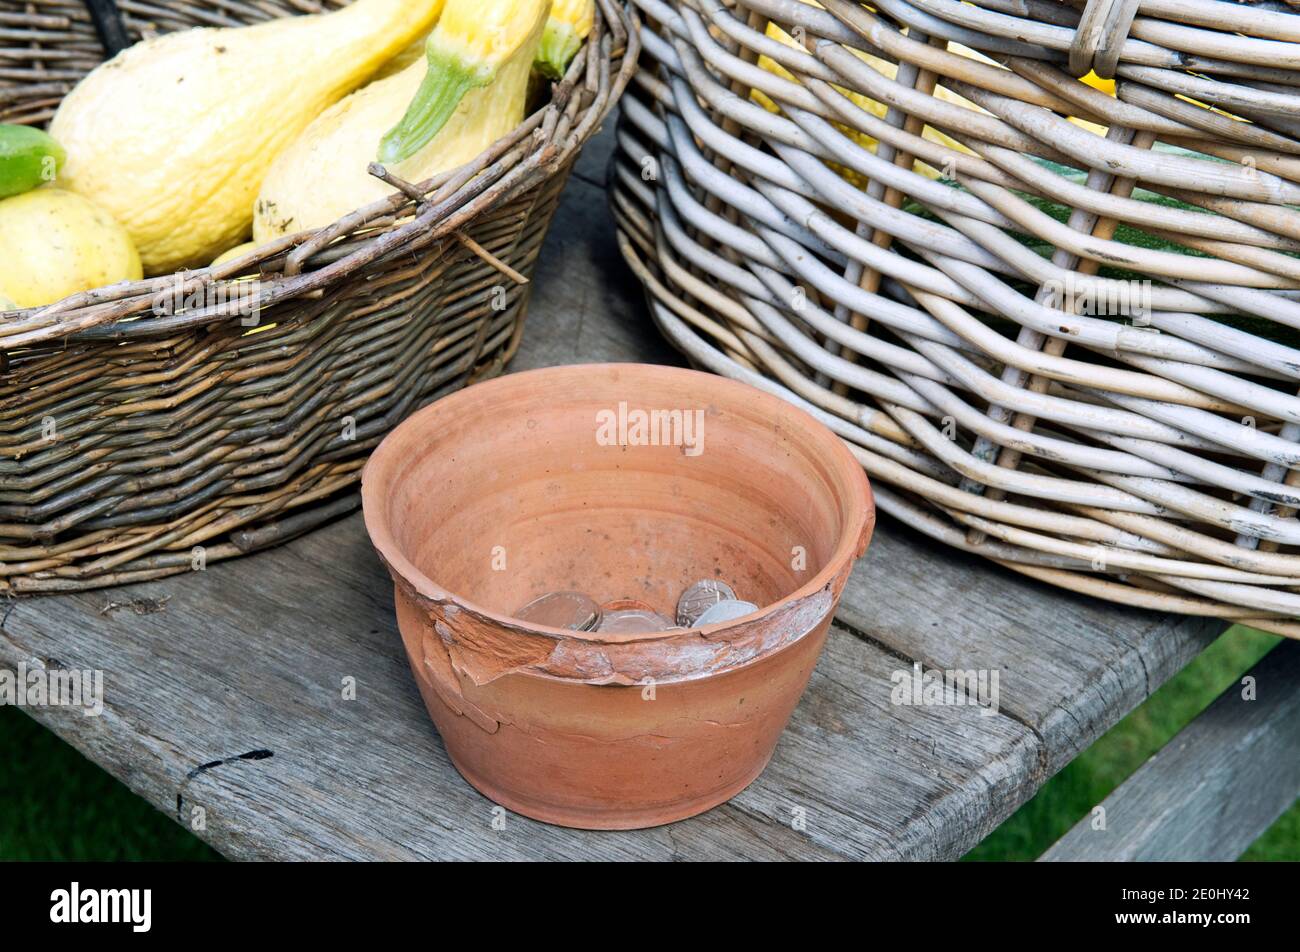 Chipped Terracotta flower pot with takings inside money from the sale of vegetables in between two wicker baskets Stock Photo